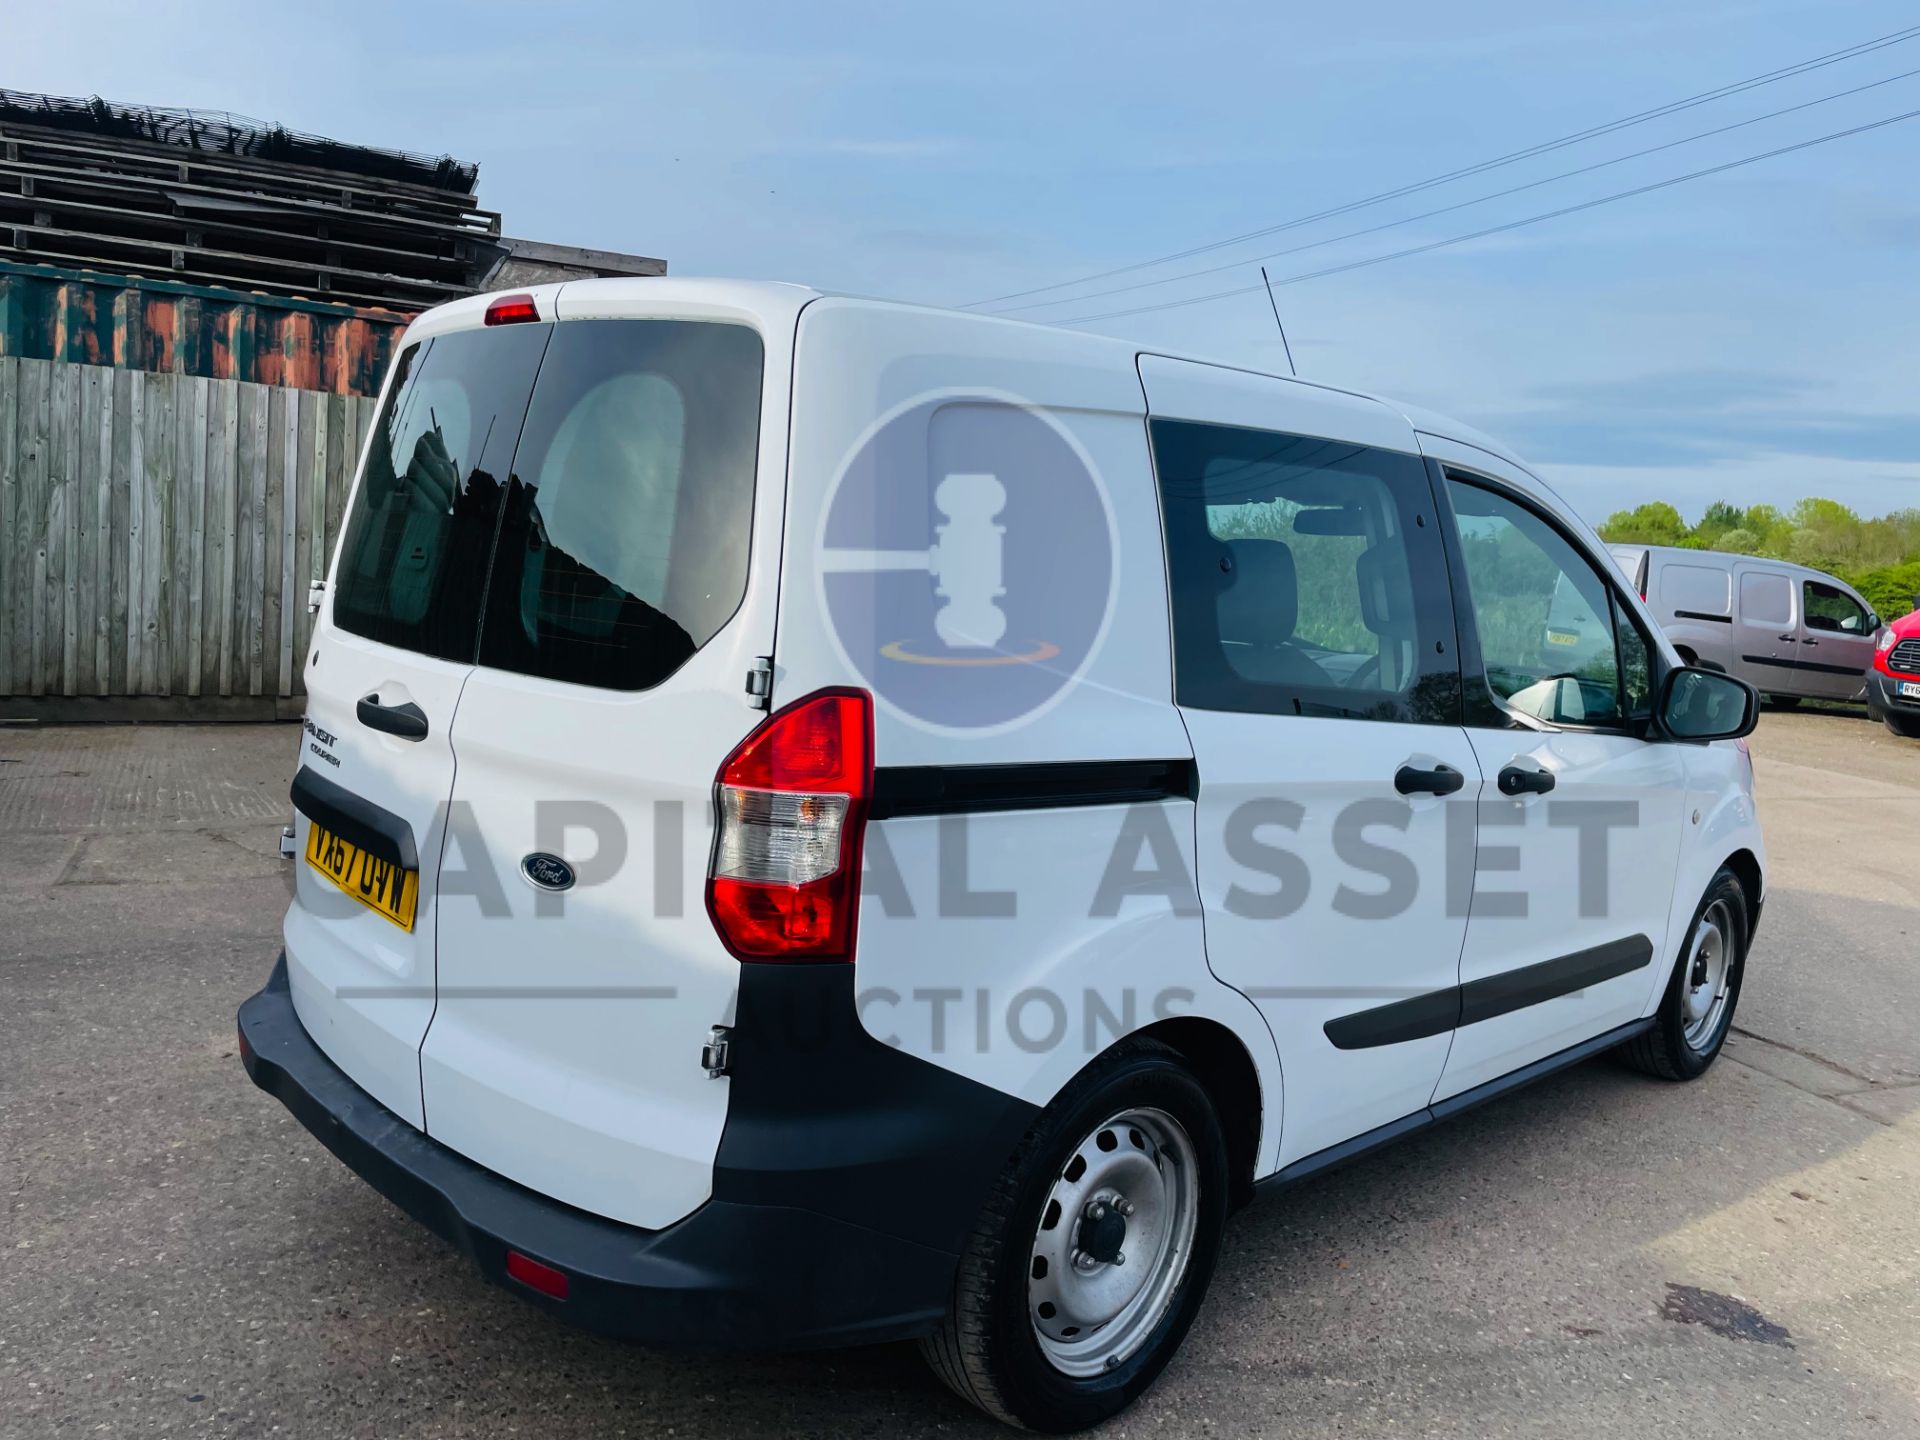 (ON SALE) FORD TRANSIT COURIER *5 SEATER CREW VAN* (2018-EURO 6) 1.5 TDCI -60 MPG+ (1 FORMER KEEPER) - Image 12 of 37